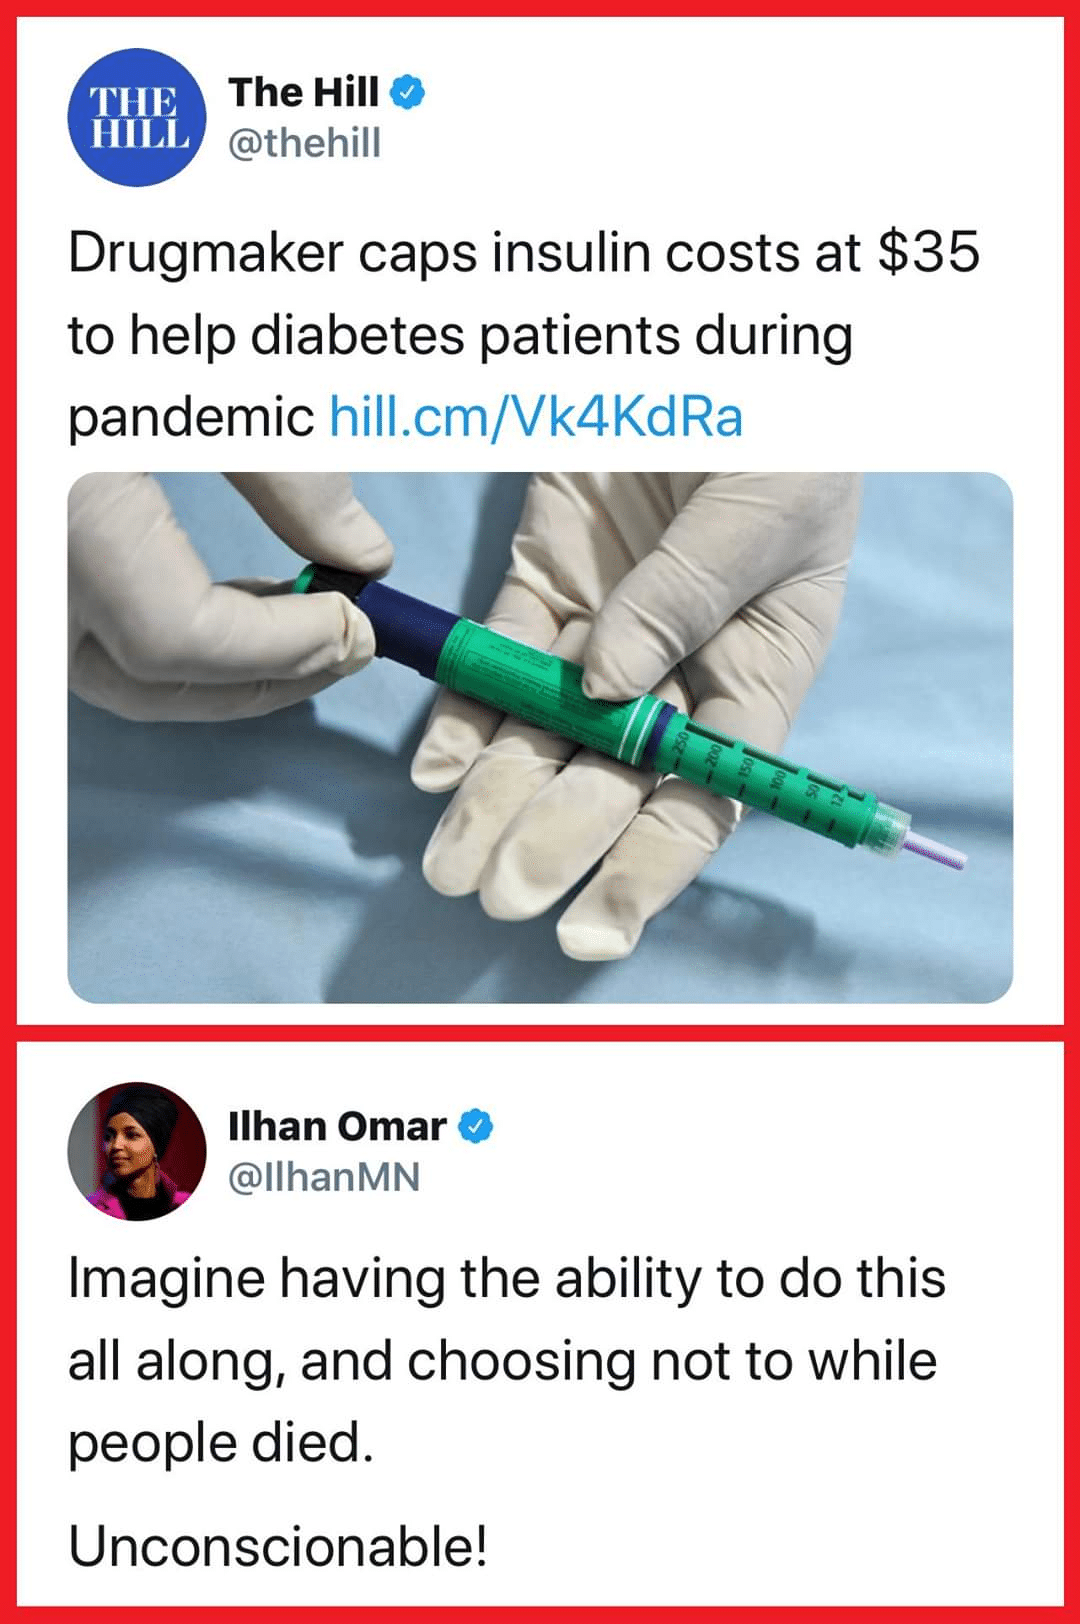 Tweets, American, UK, Sanofi, European, Europe Black Twitter Memes Tweets, American, UK, Sanofi, European, Europe text: The Hill e T11Fu @thehill Drugmaker caps insulin costs at $35 to help diabetes patients during pandemic hill.cm/Vk4KdRa Ilhan Omar @IlhanMN Imagine having the ability to do this all along, and choosing not to while people died. Unconscionable! 